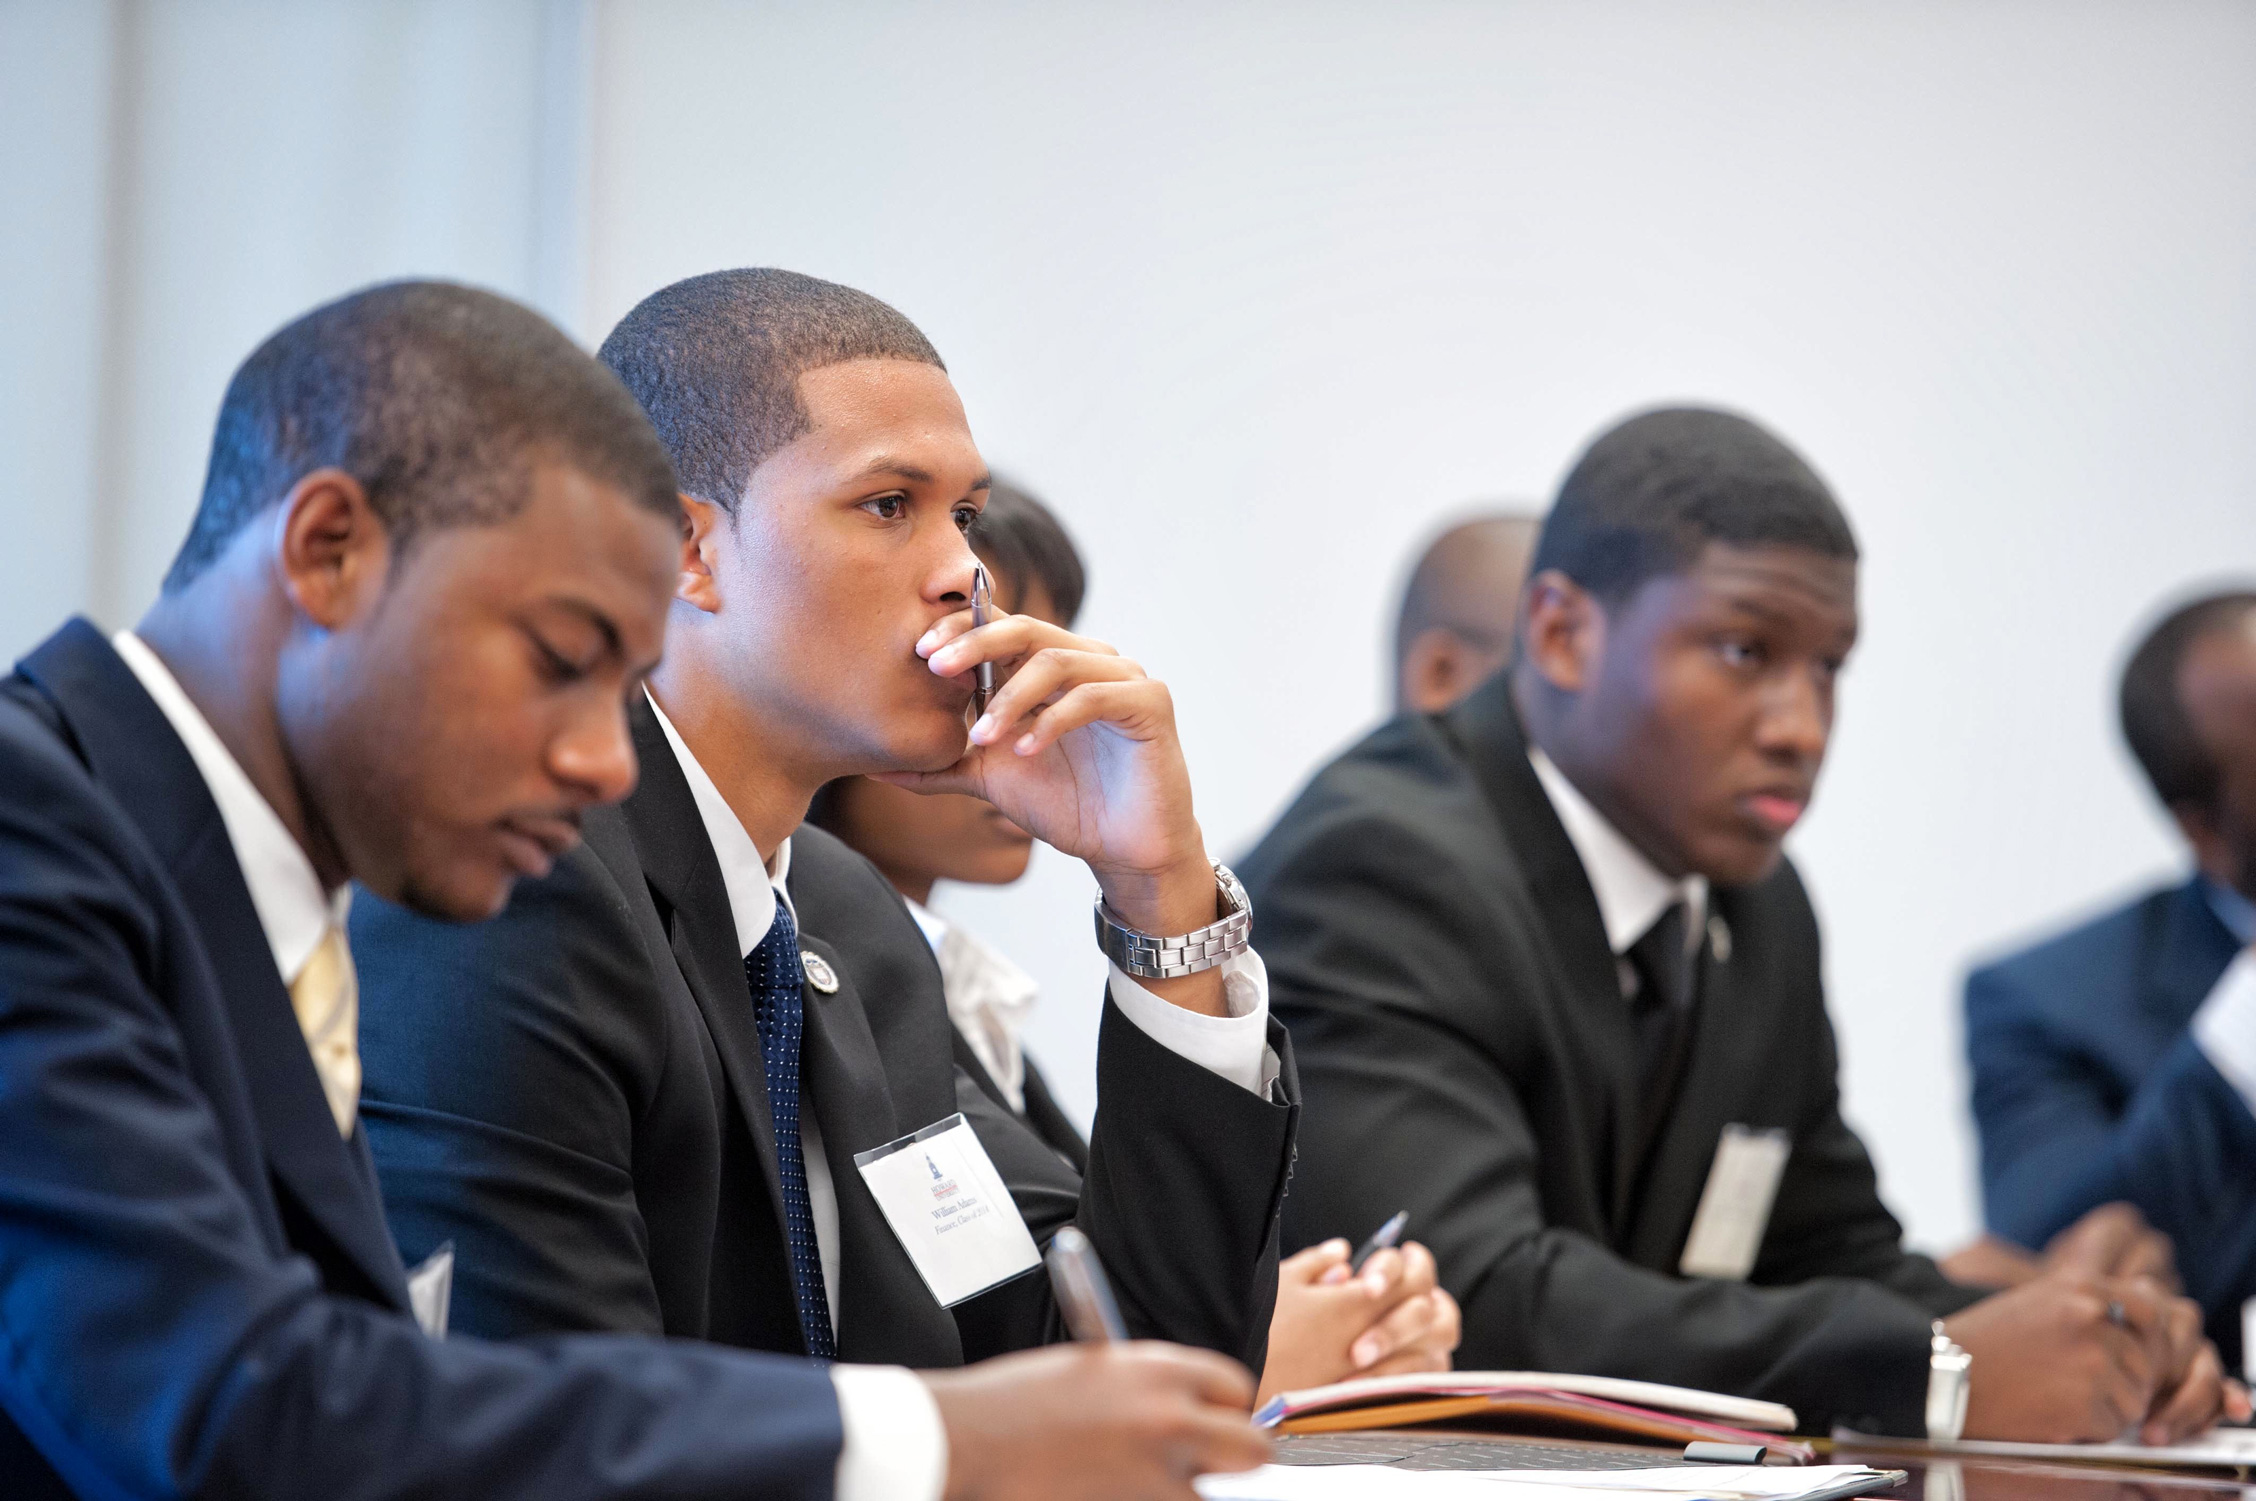 Students in suits sitting at a lecture.